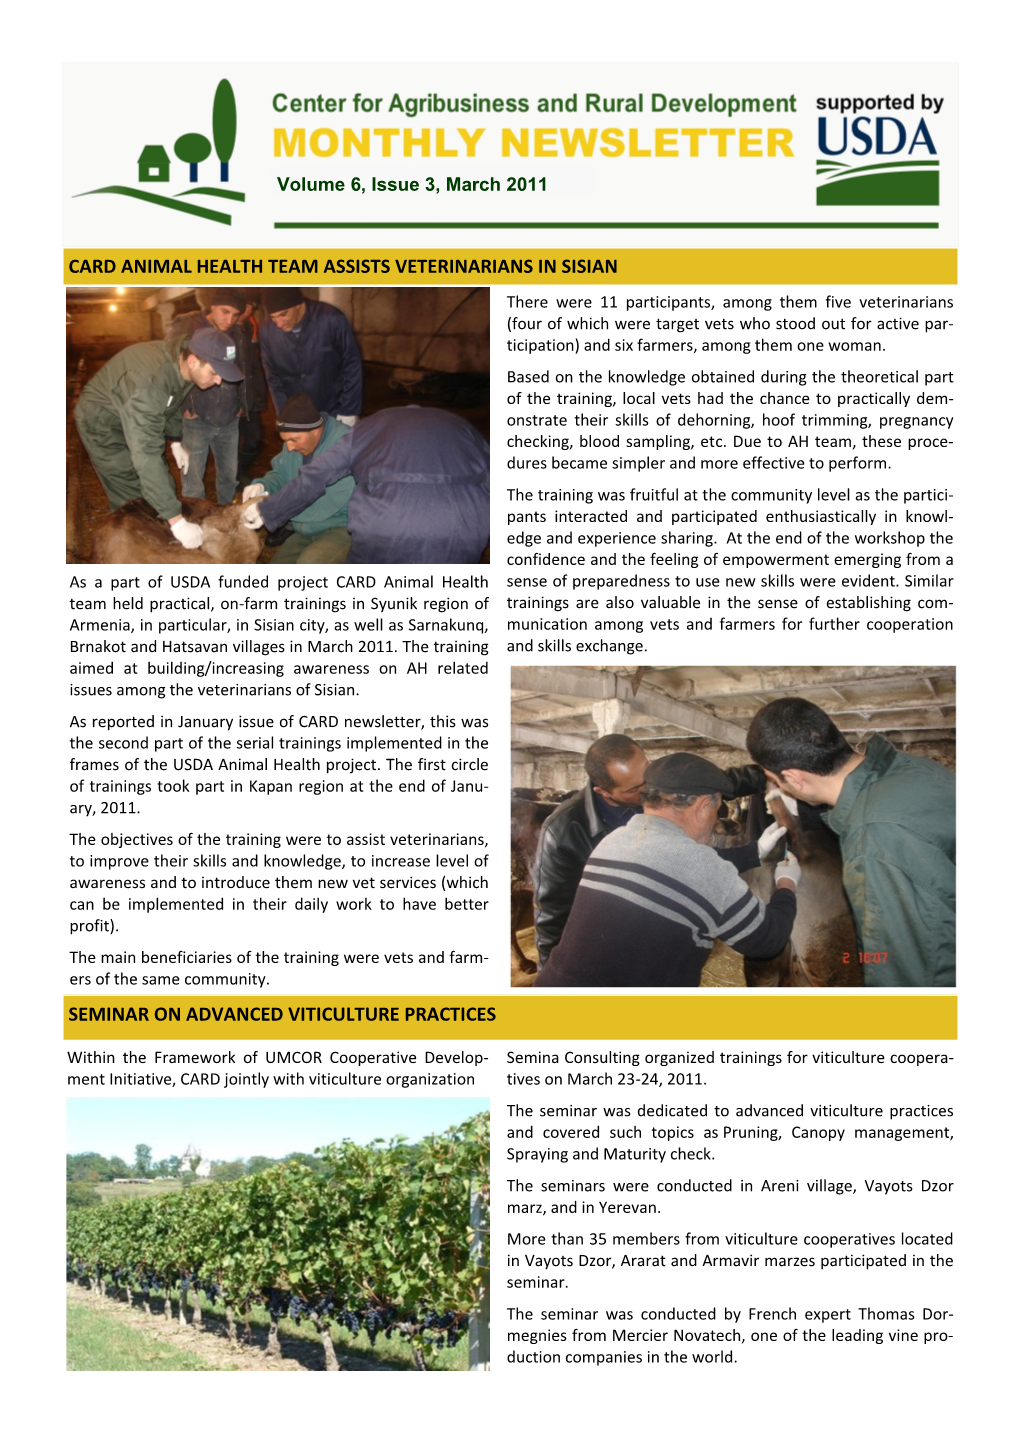 Card Animal Health Team Assists Veterinarians in Sisian Seminar on Advanced Viticulture Practices